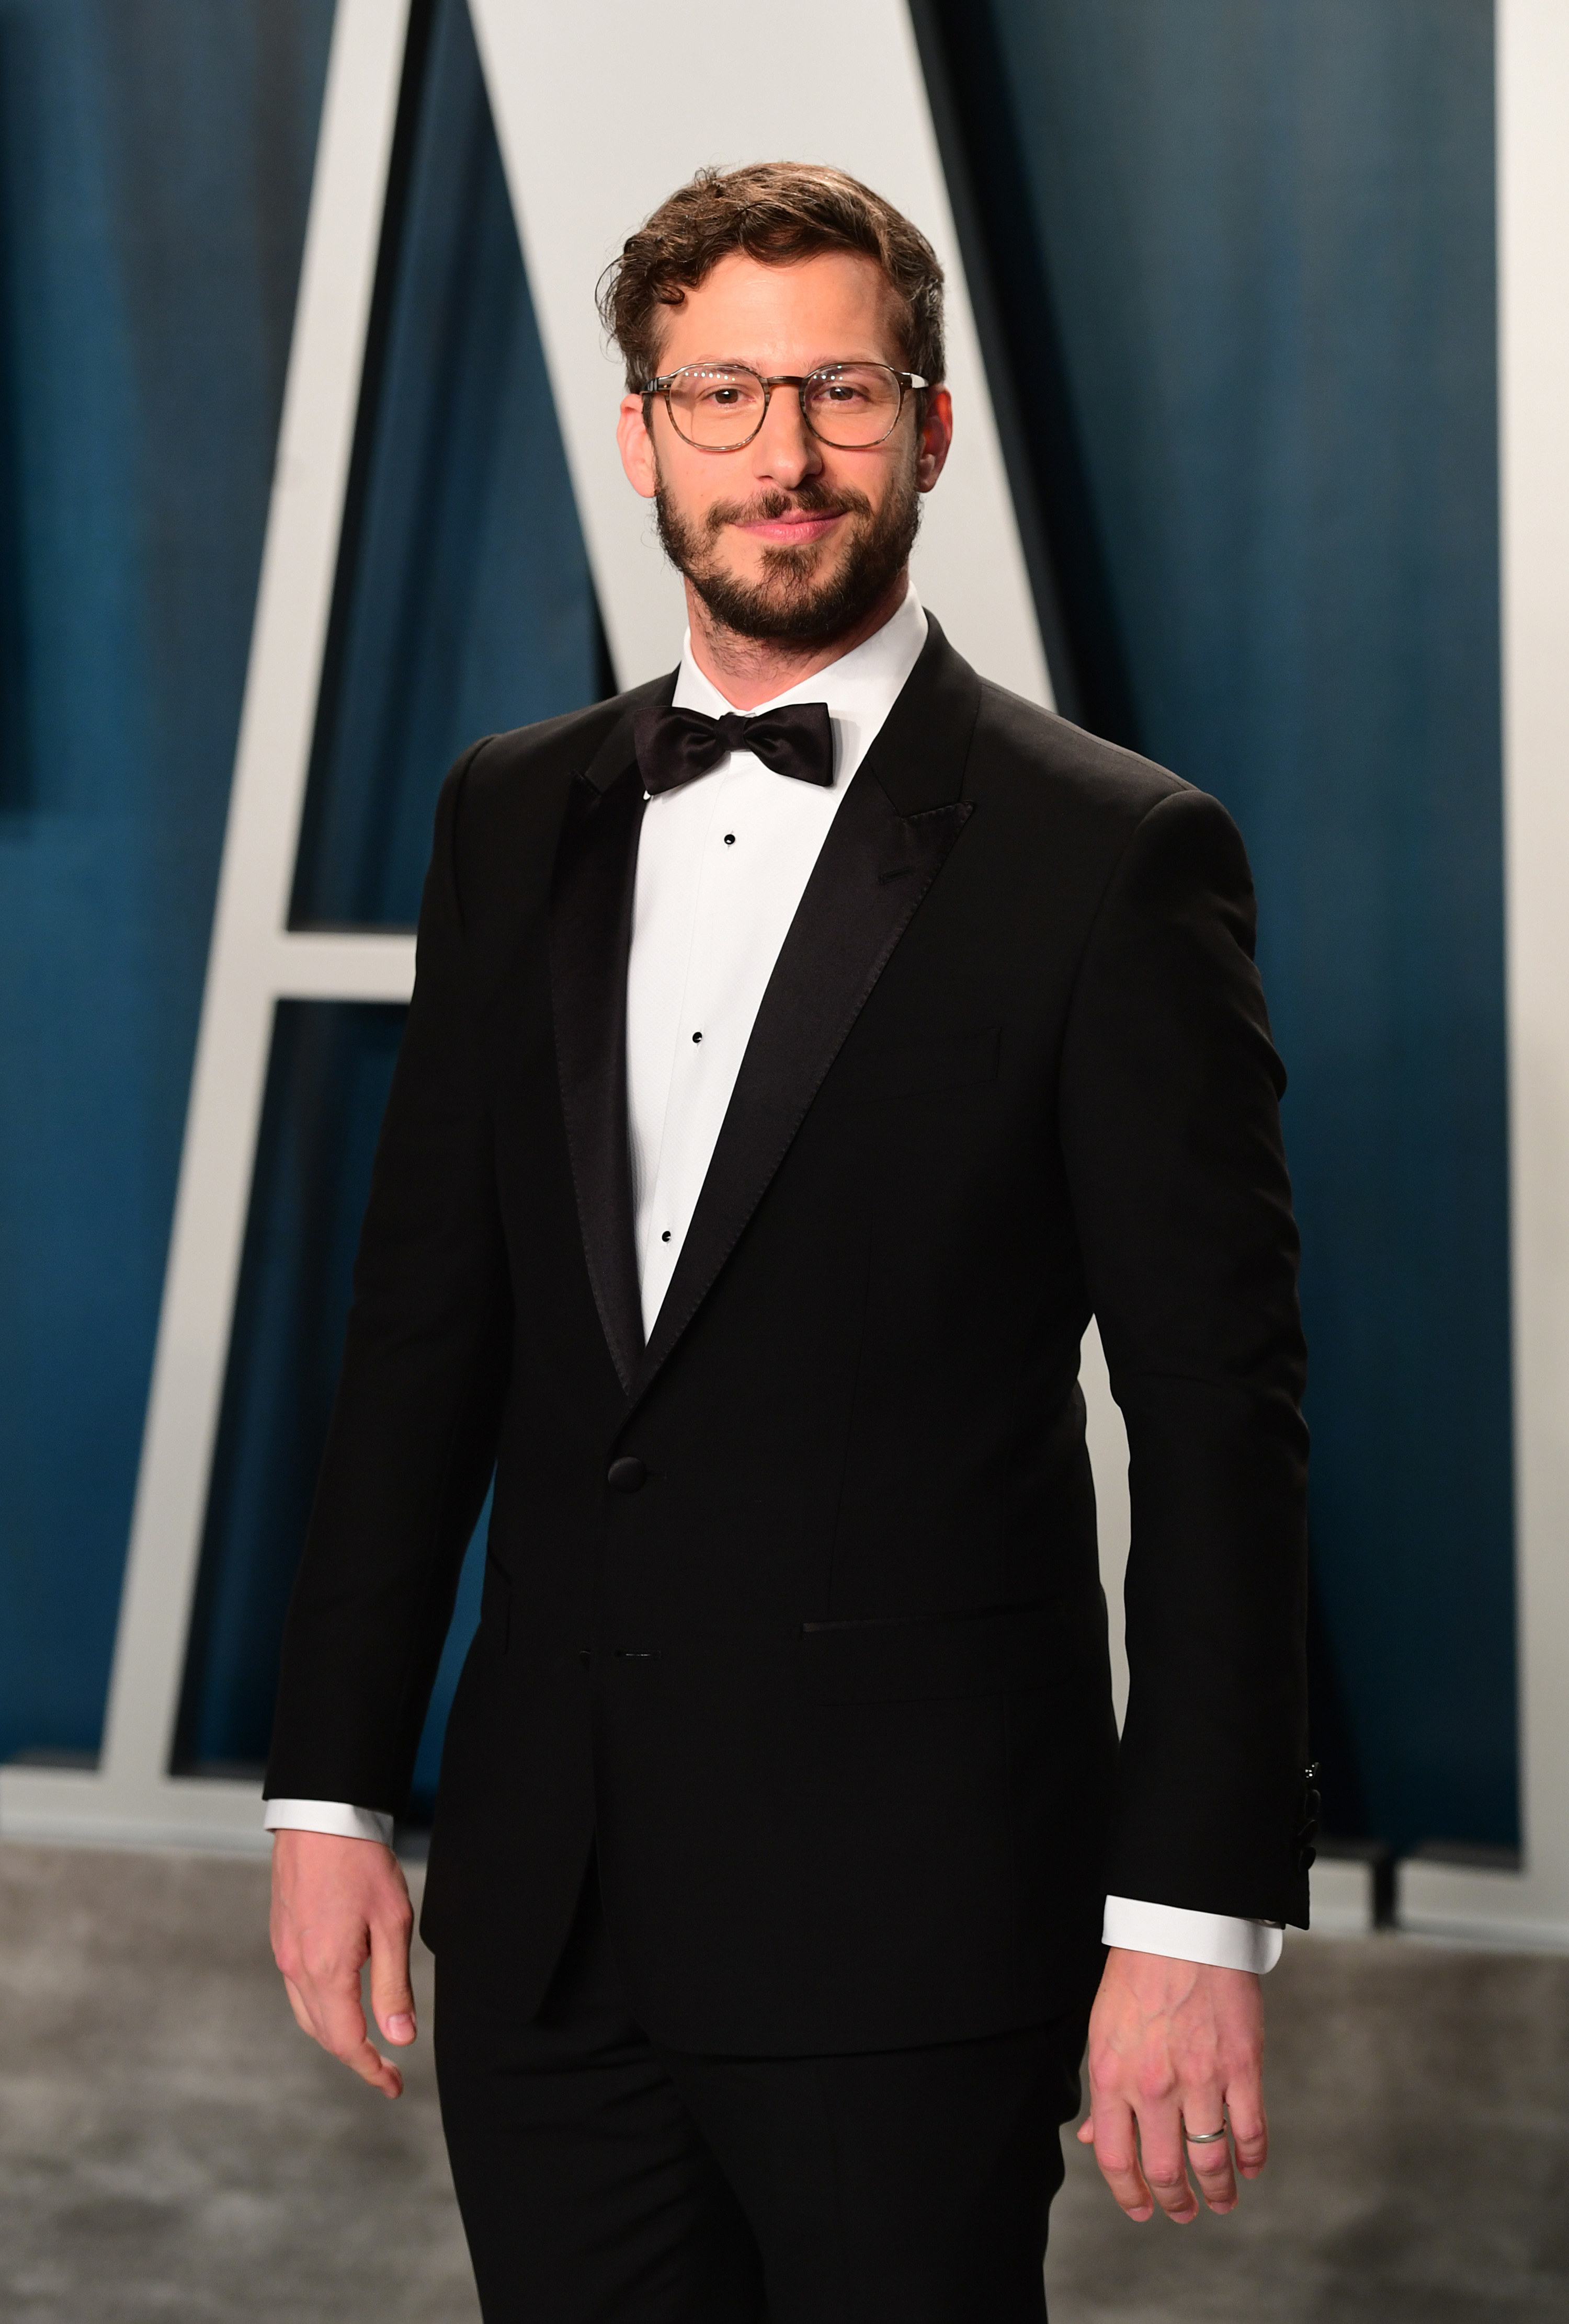 Andy Samberg poses at the 2020 Vanity Fair Oscar Party held at the Wallis Annenberg Center for the Performing Arts